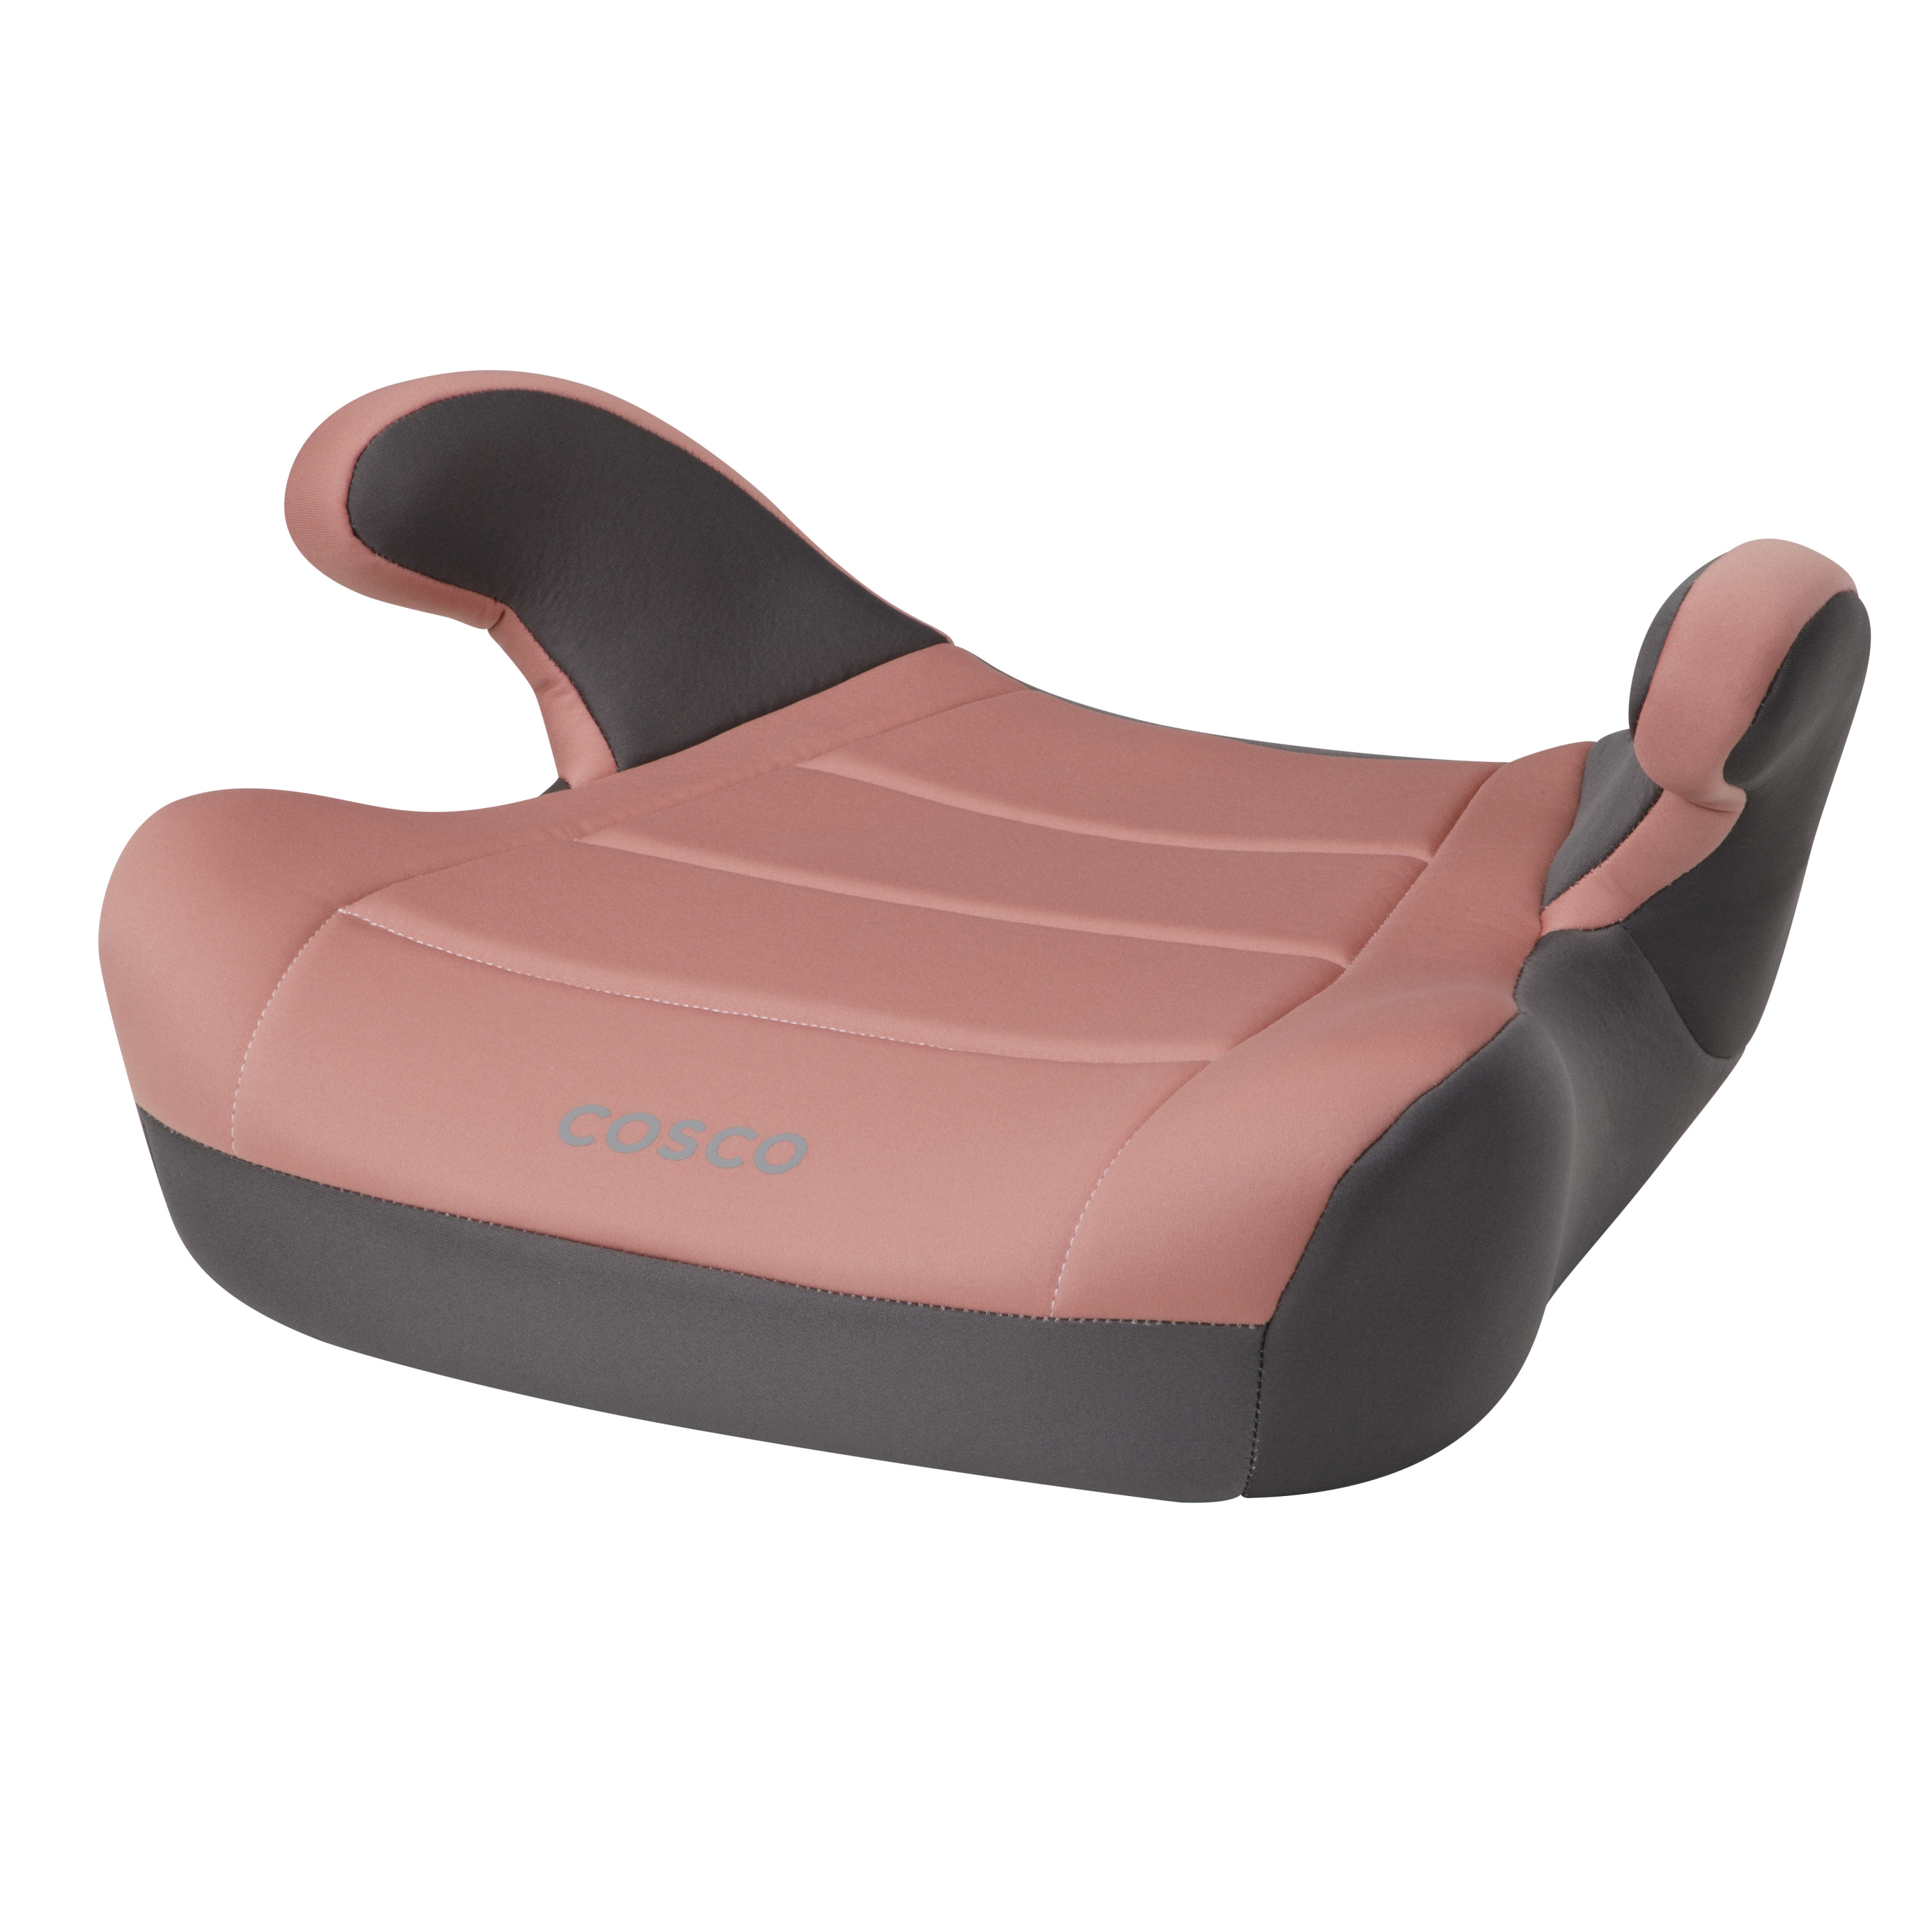 Cosco Kids Rise LX Booster Car Seat, Cameo Rose - image 1 of 15